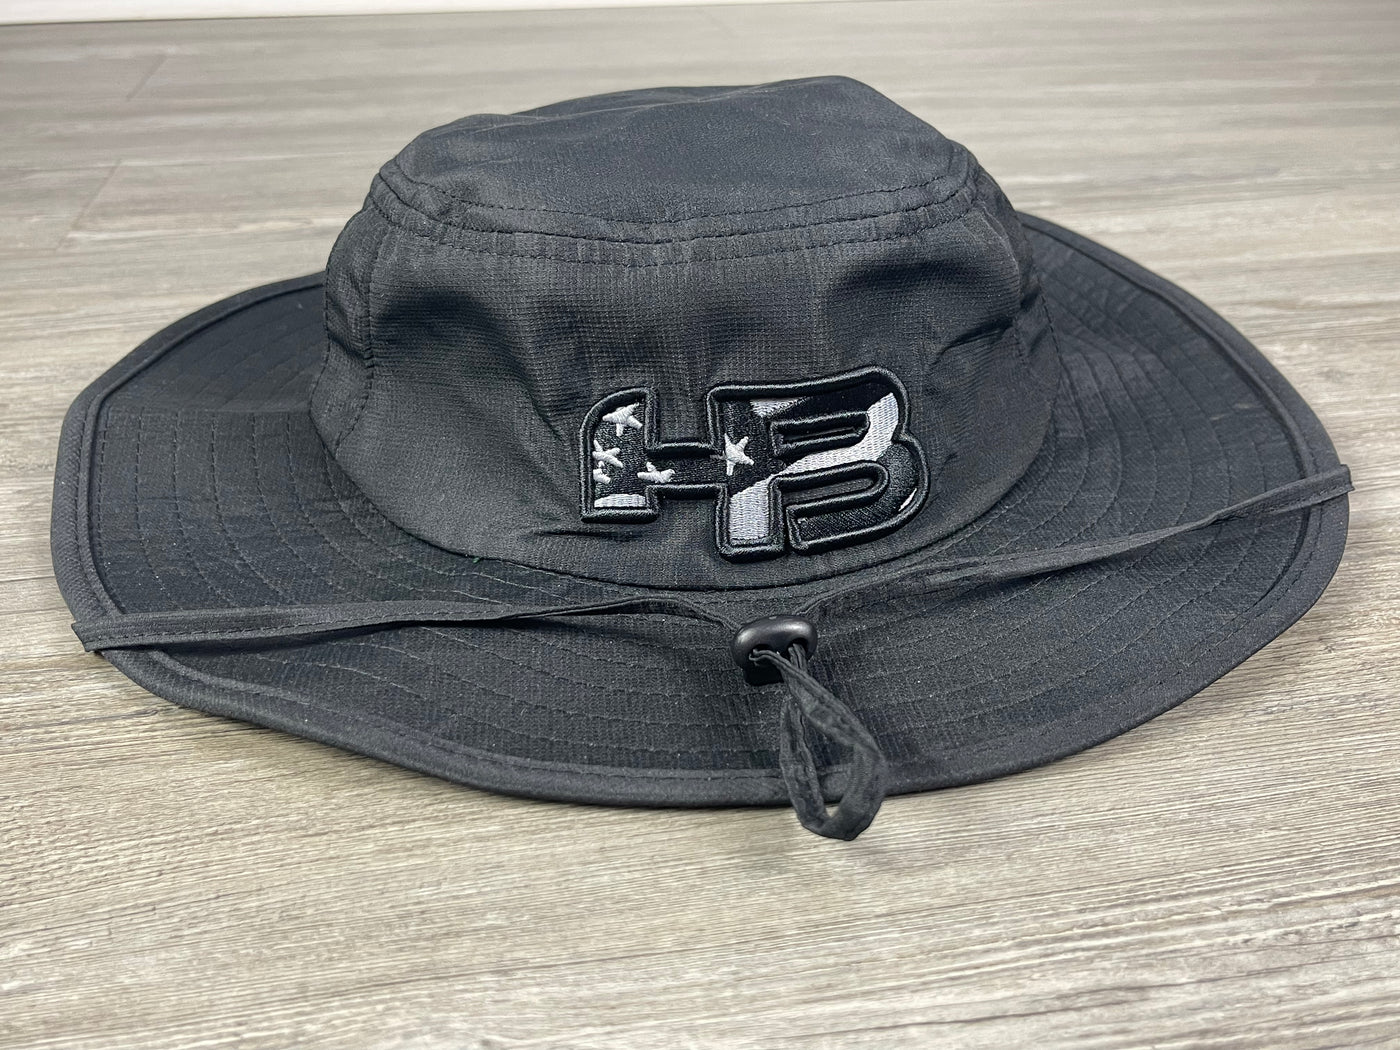 HB Sports Exclusive Pacific 1946 Boonie Bucket Cap: USA BLACKOUT ...